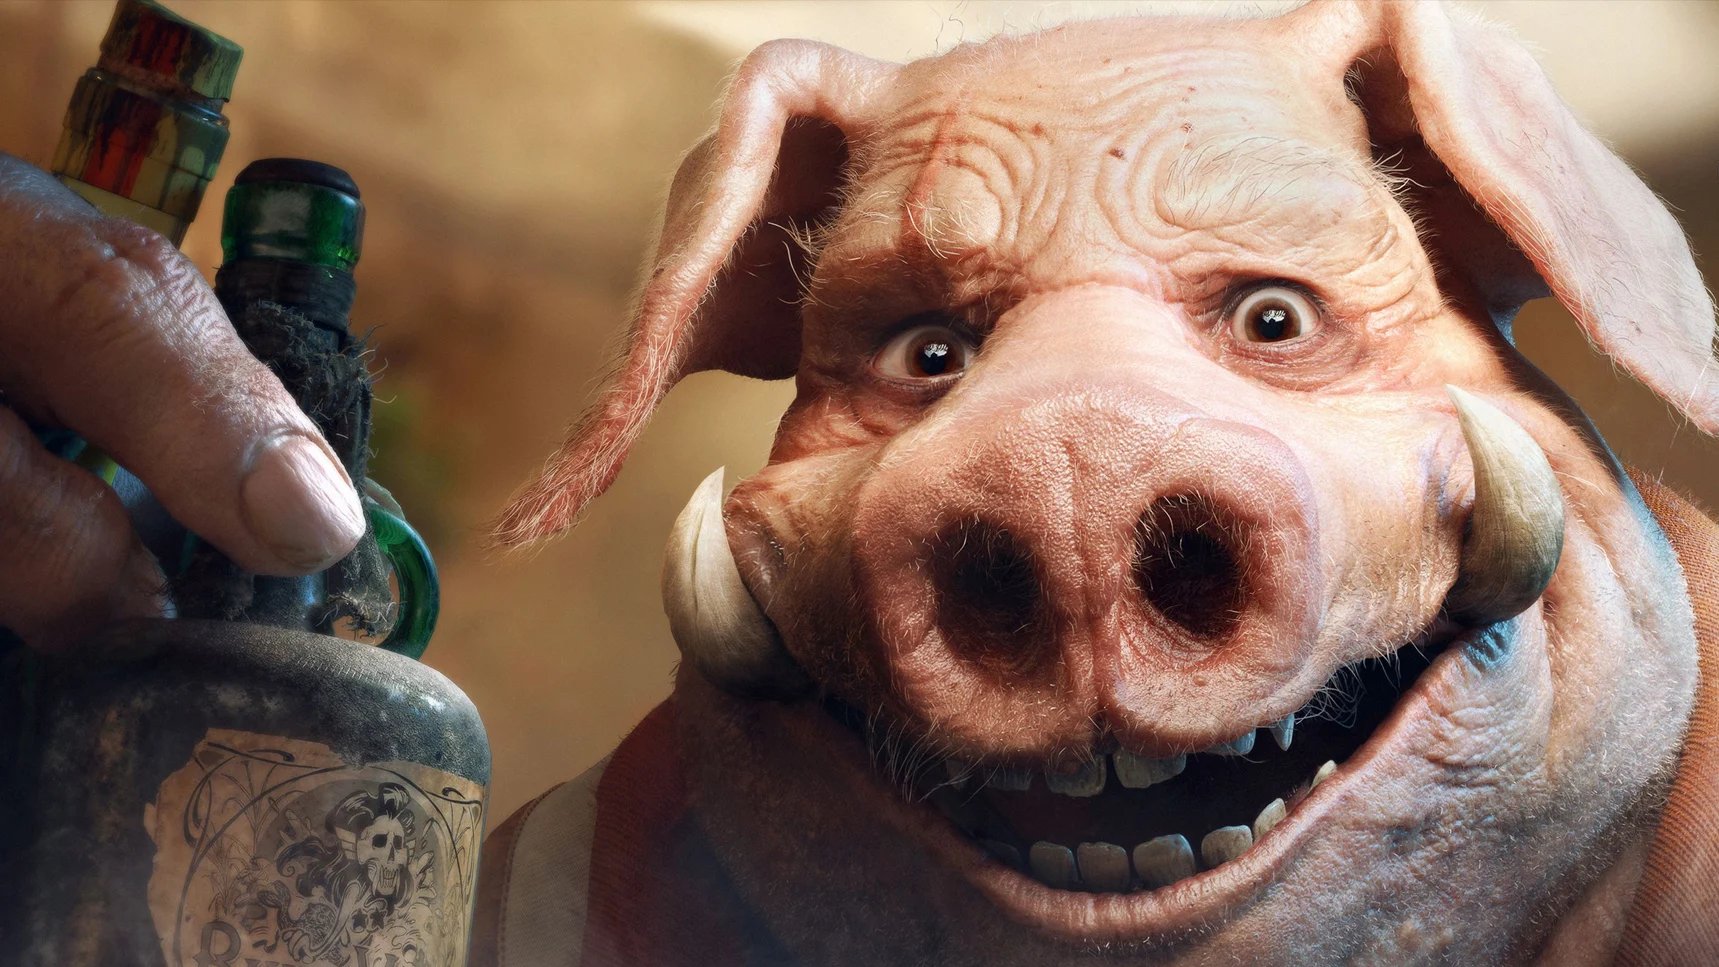 Ubisoft calls Beyond Good & Evil 2 one of its most ambitious games